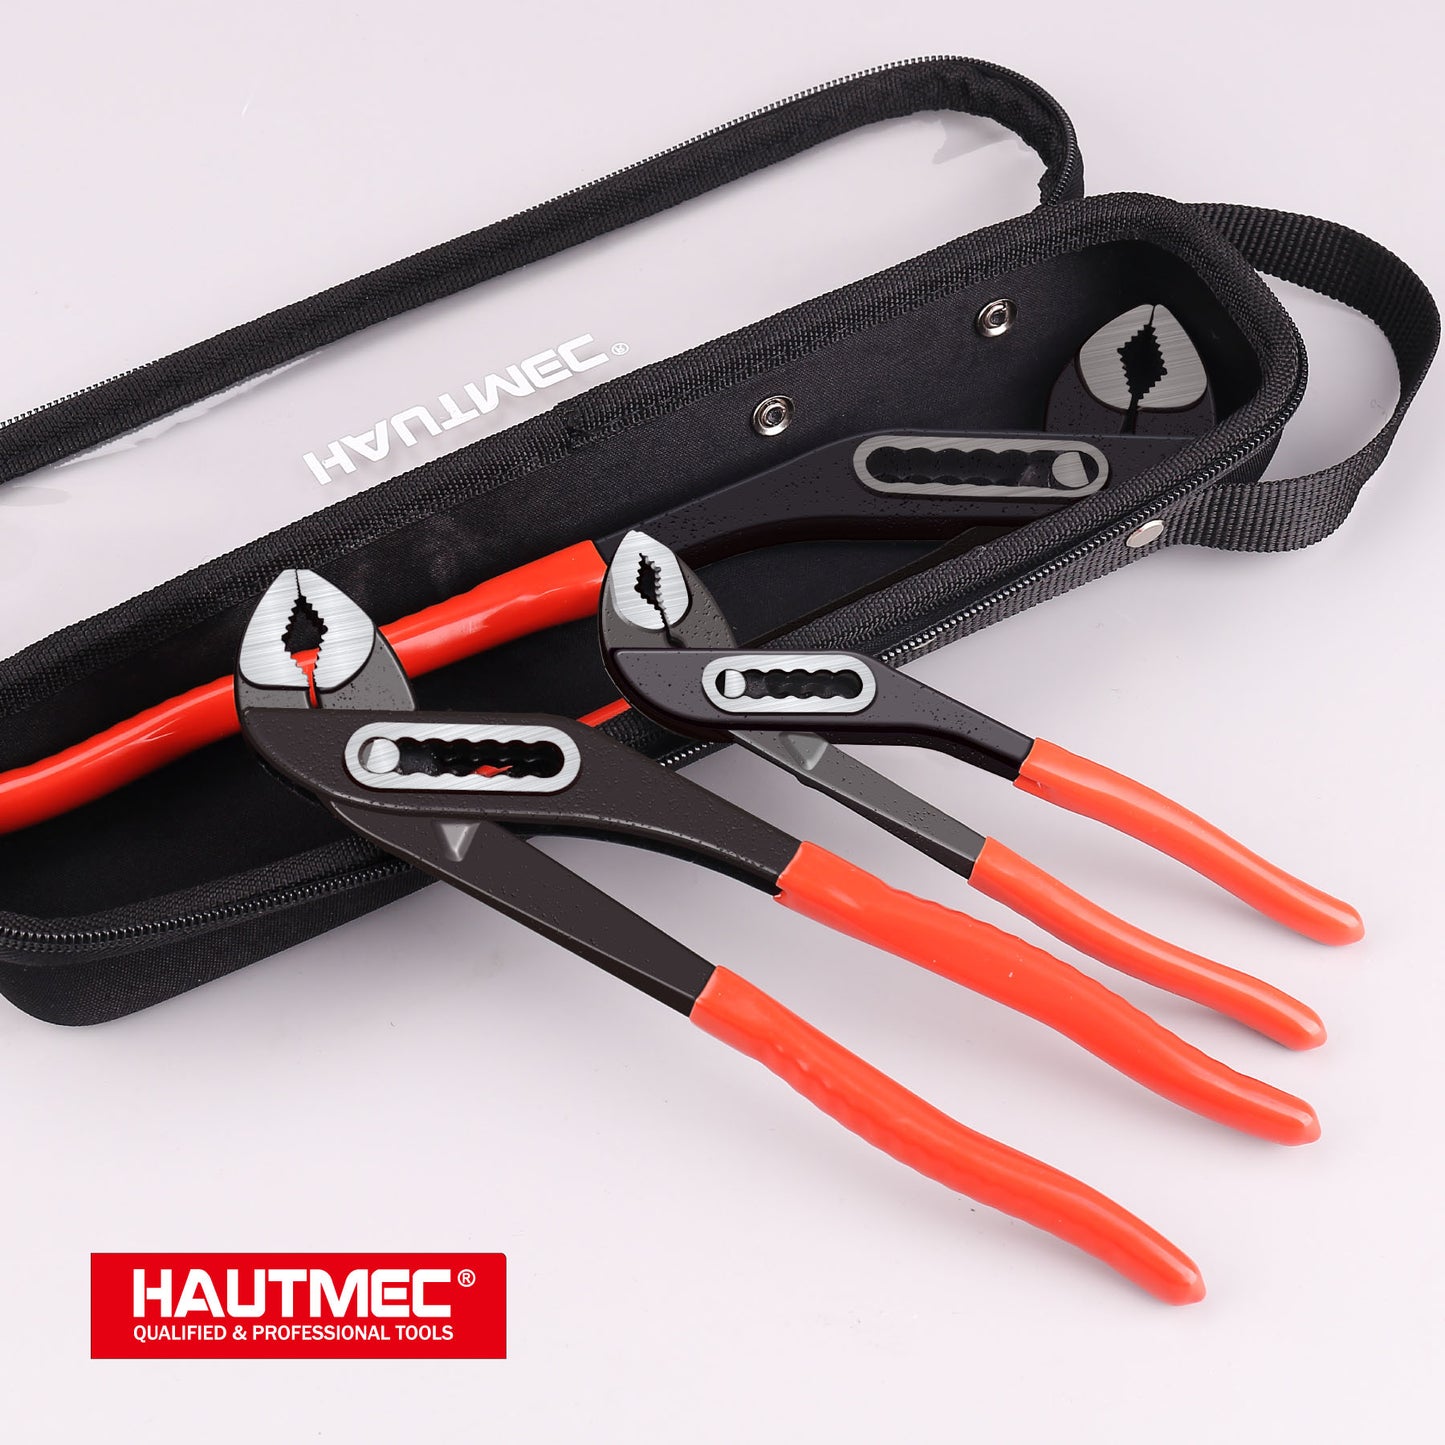 HAUTMEC Water Pump Pliers Set, Wider Opening,Groove Joint Pliers with Curved Jaw and Quick Adjustment Lock for Gripping,Repair,Nuts,Bolts, Pipe,12/10/7 Inch HT0323